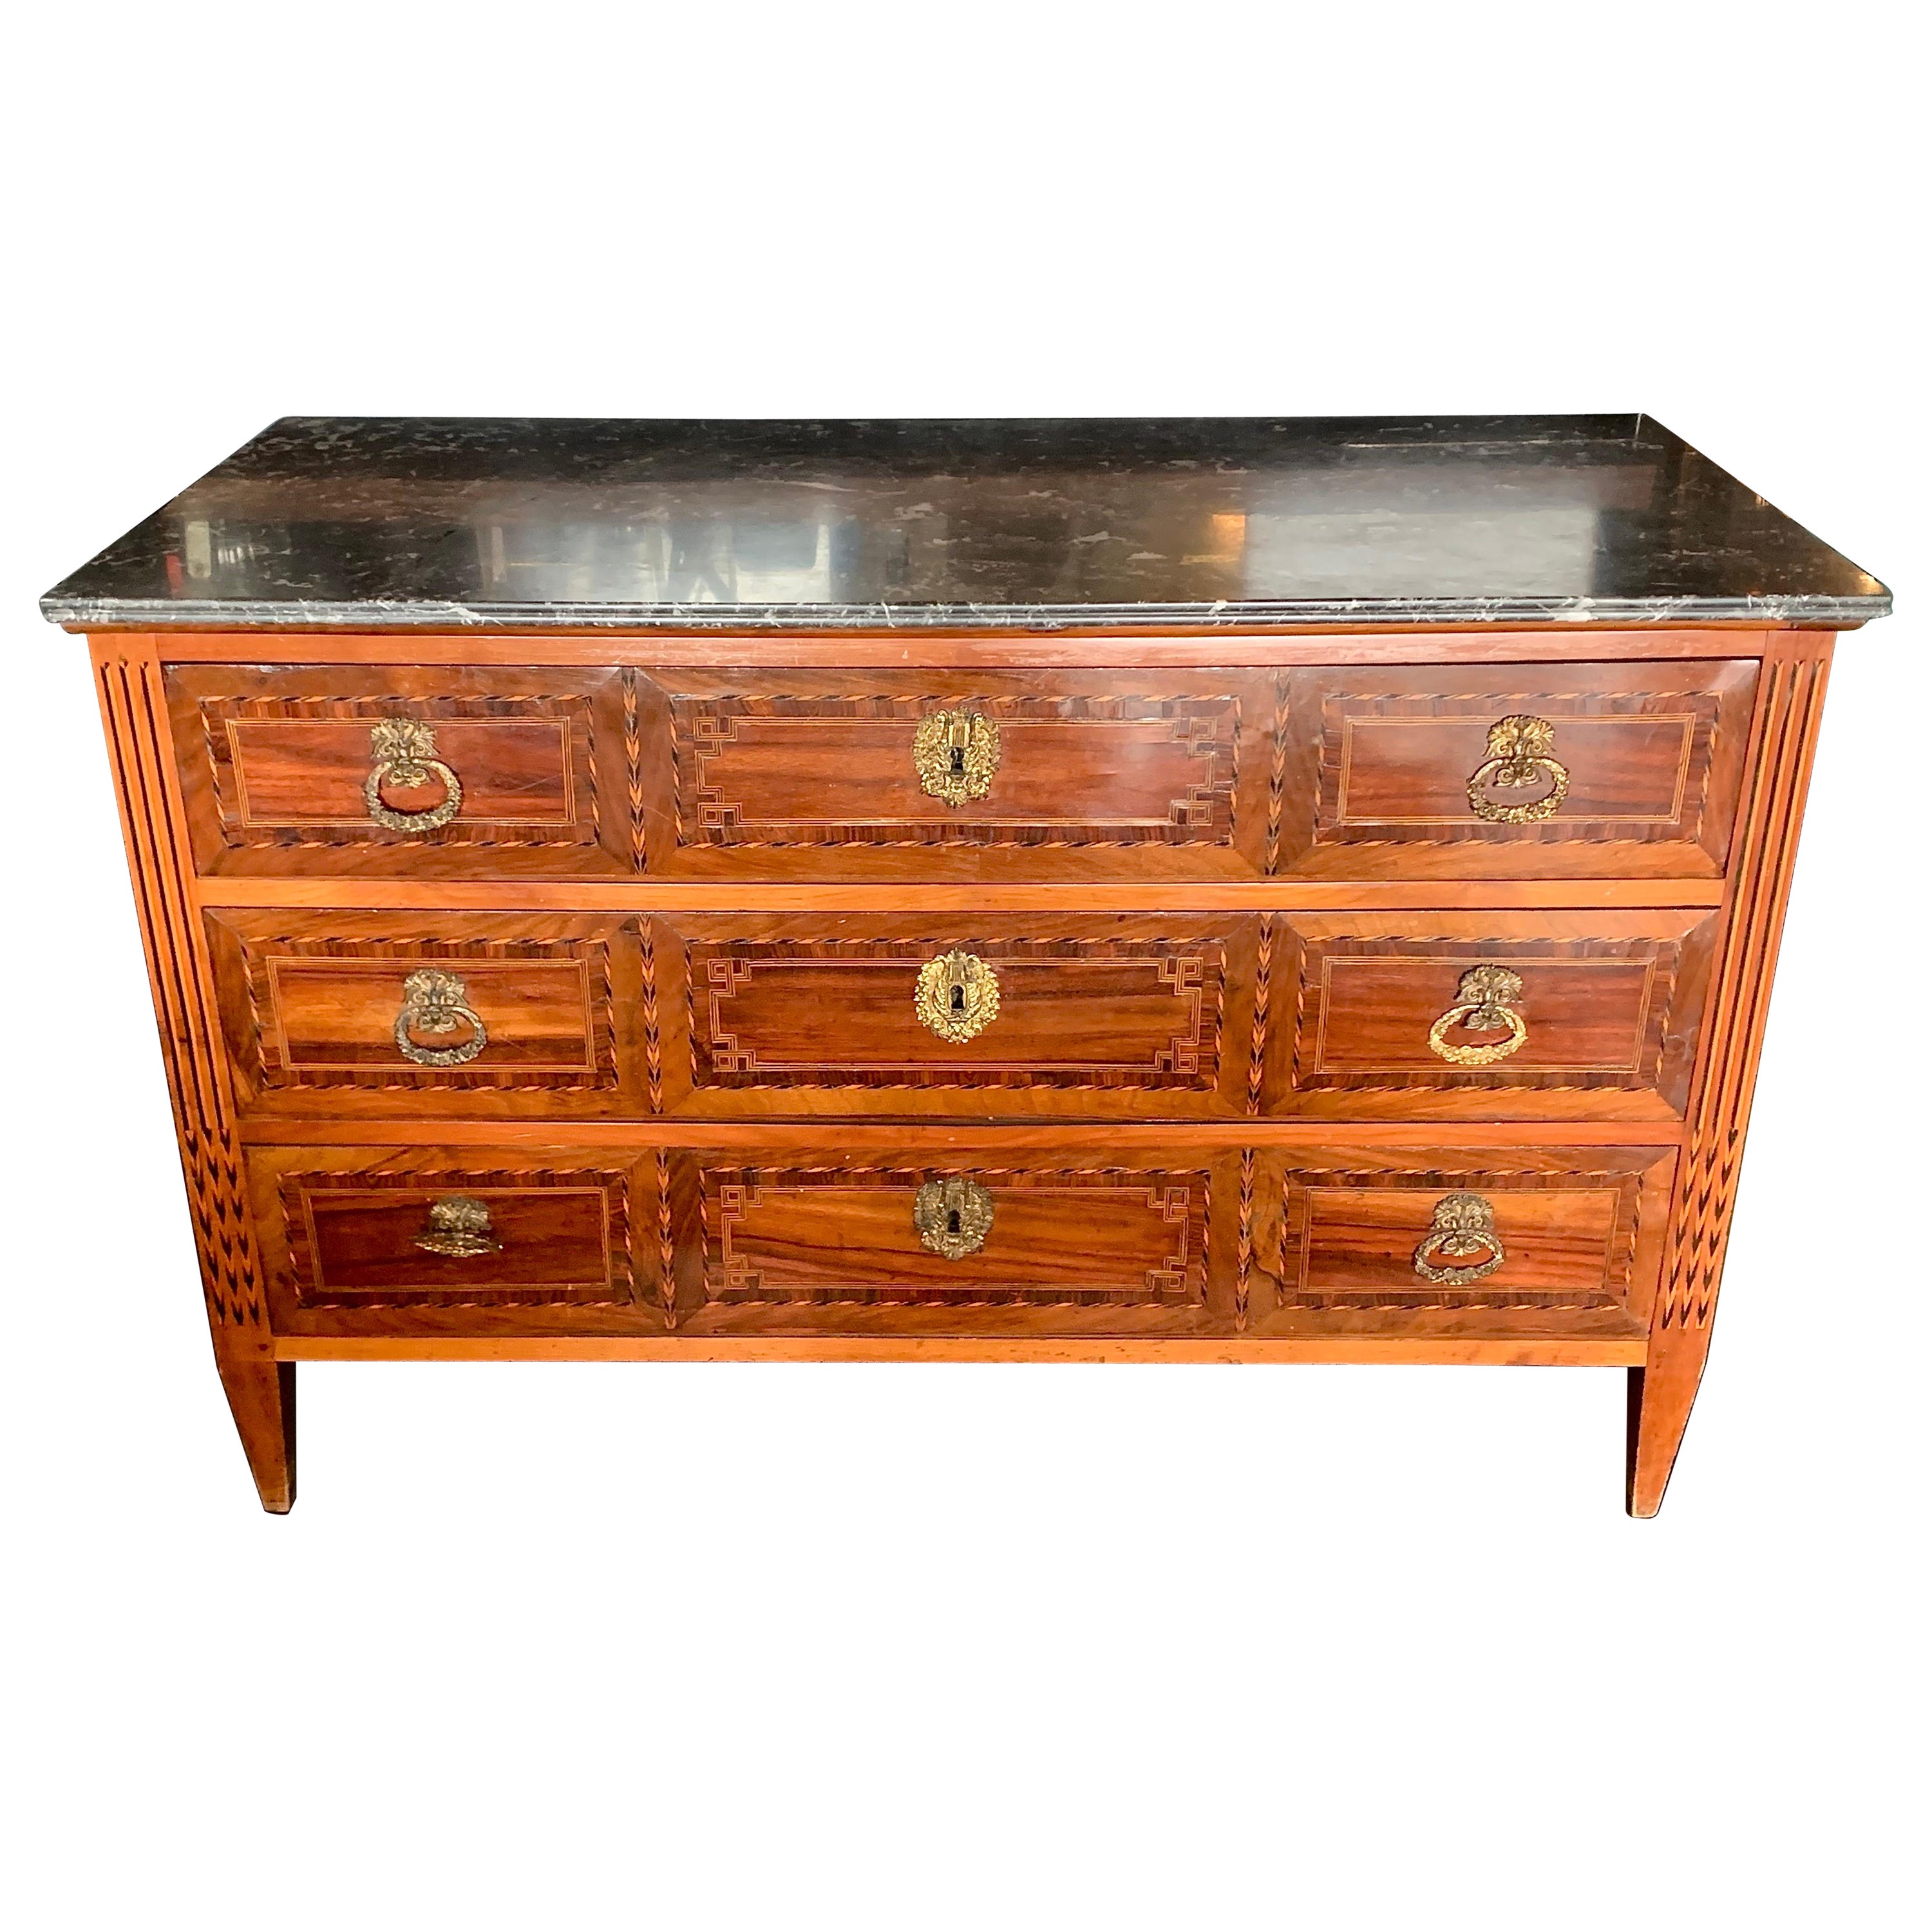 19th Century French Louis XVI Style Marquetry Walnut Commode Chest of Drawers